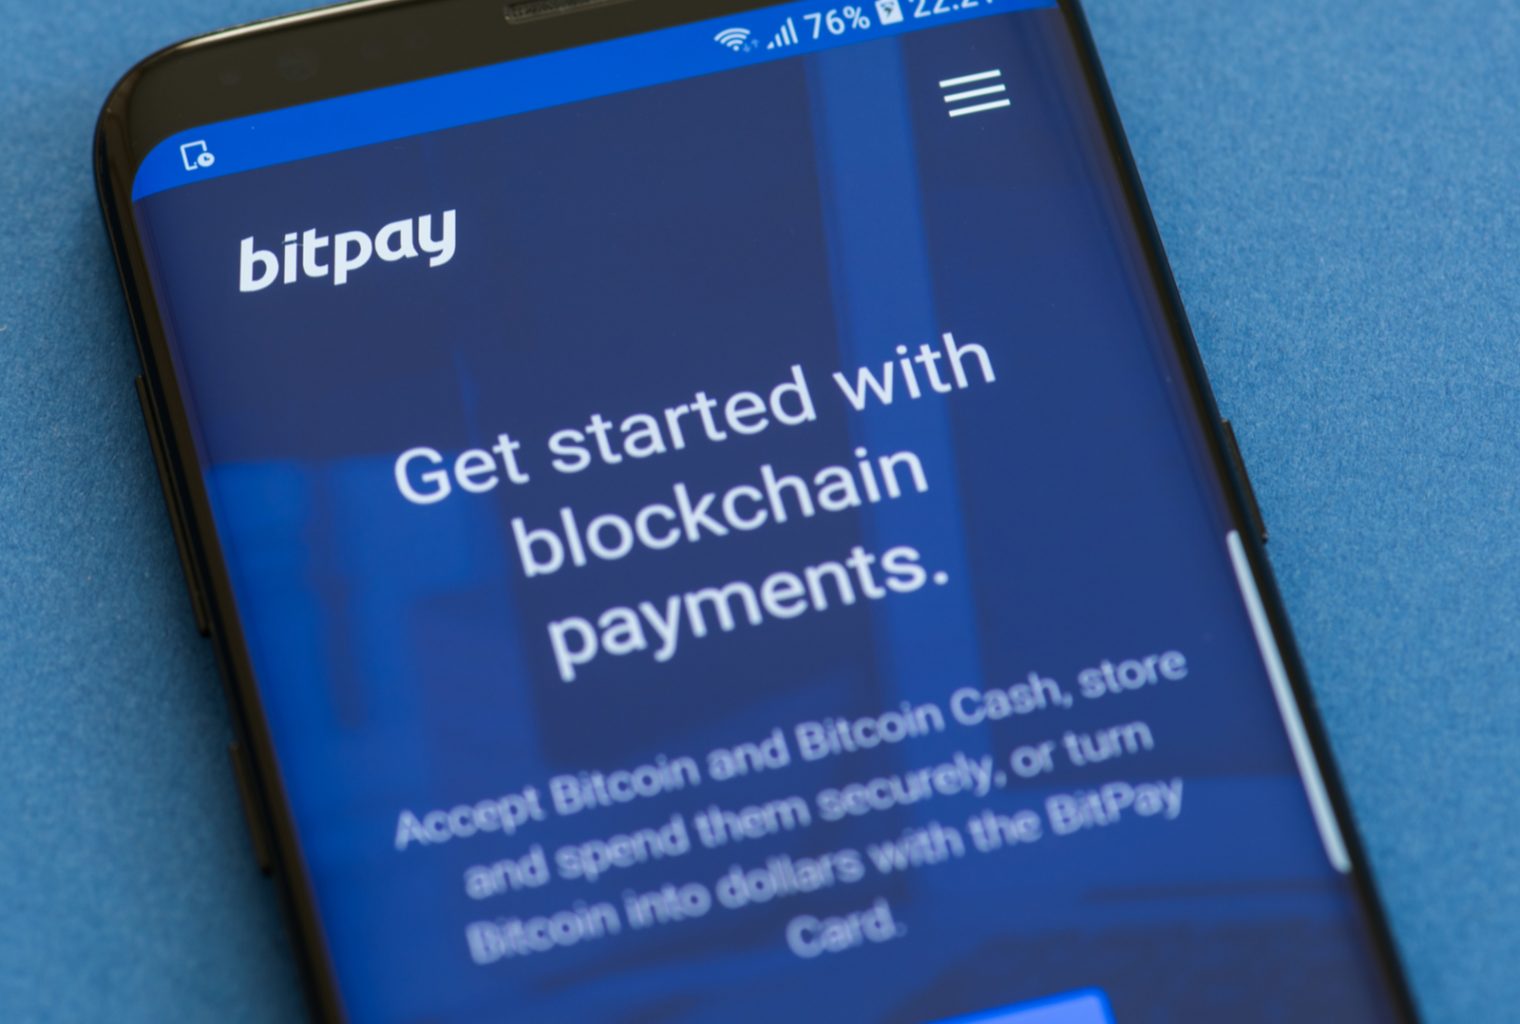 Bitpay Reports Processing Over 1 Billion Transactions In 2018 - 